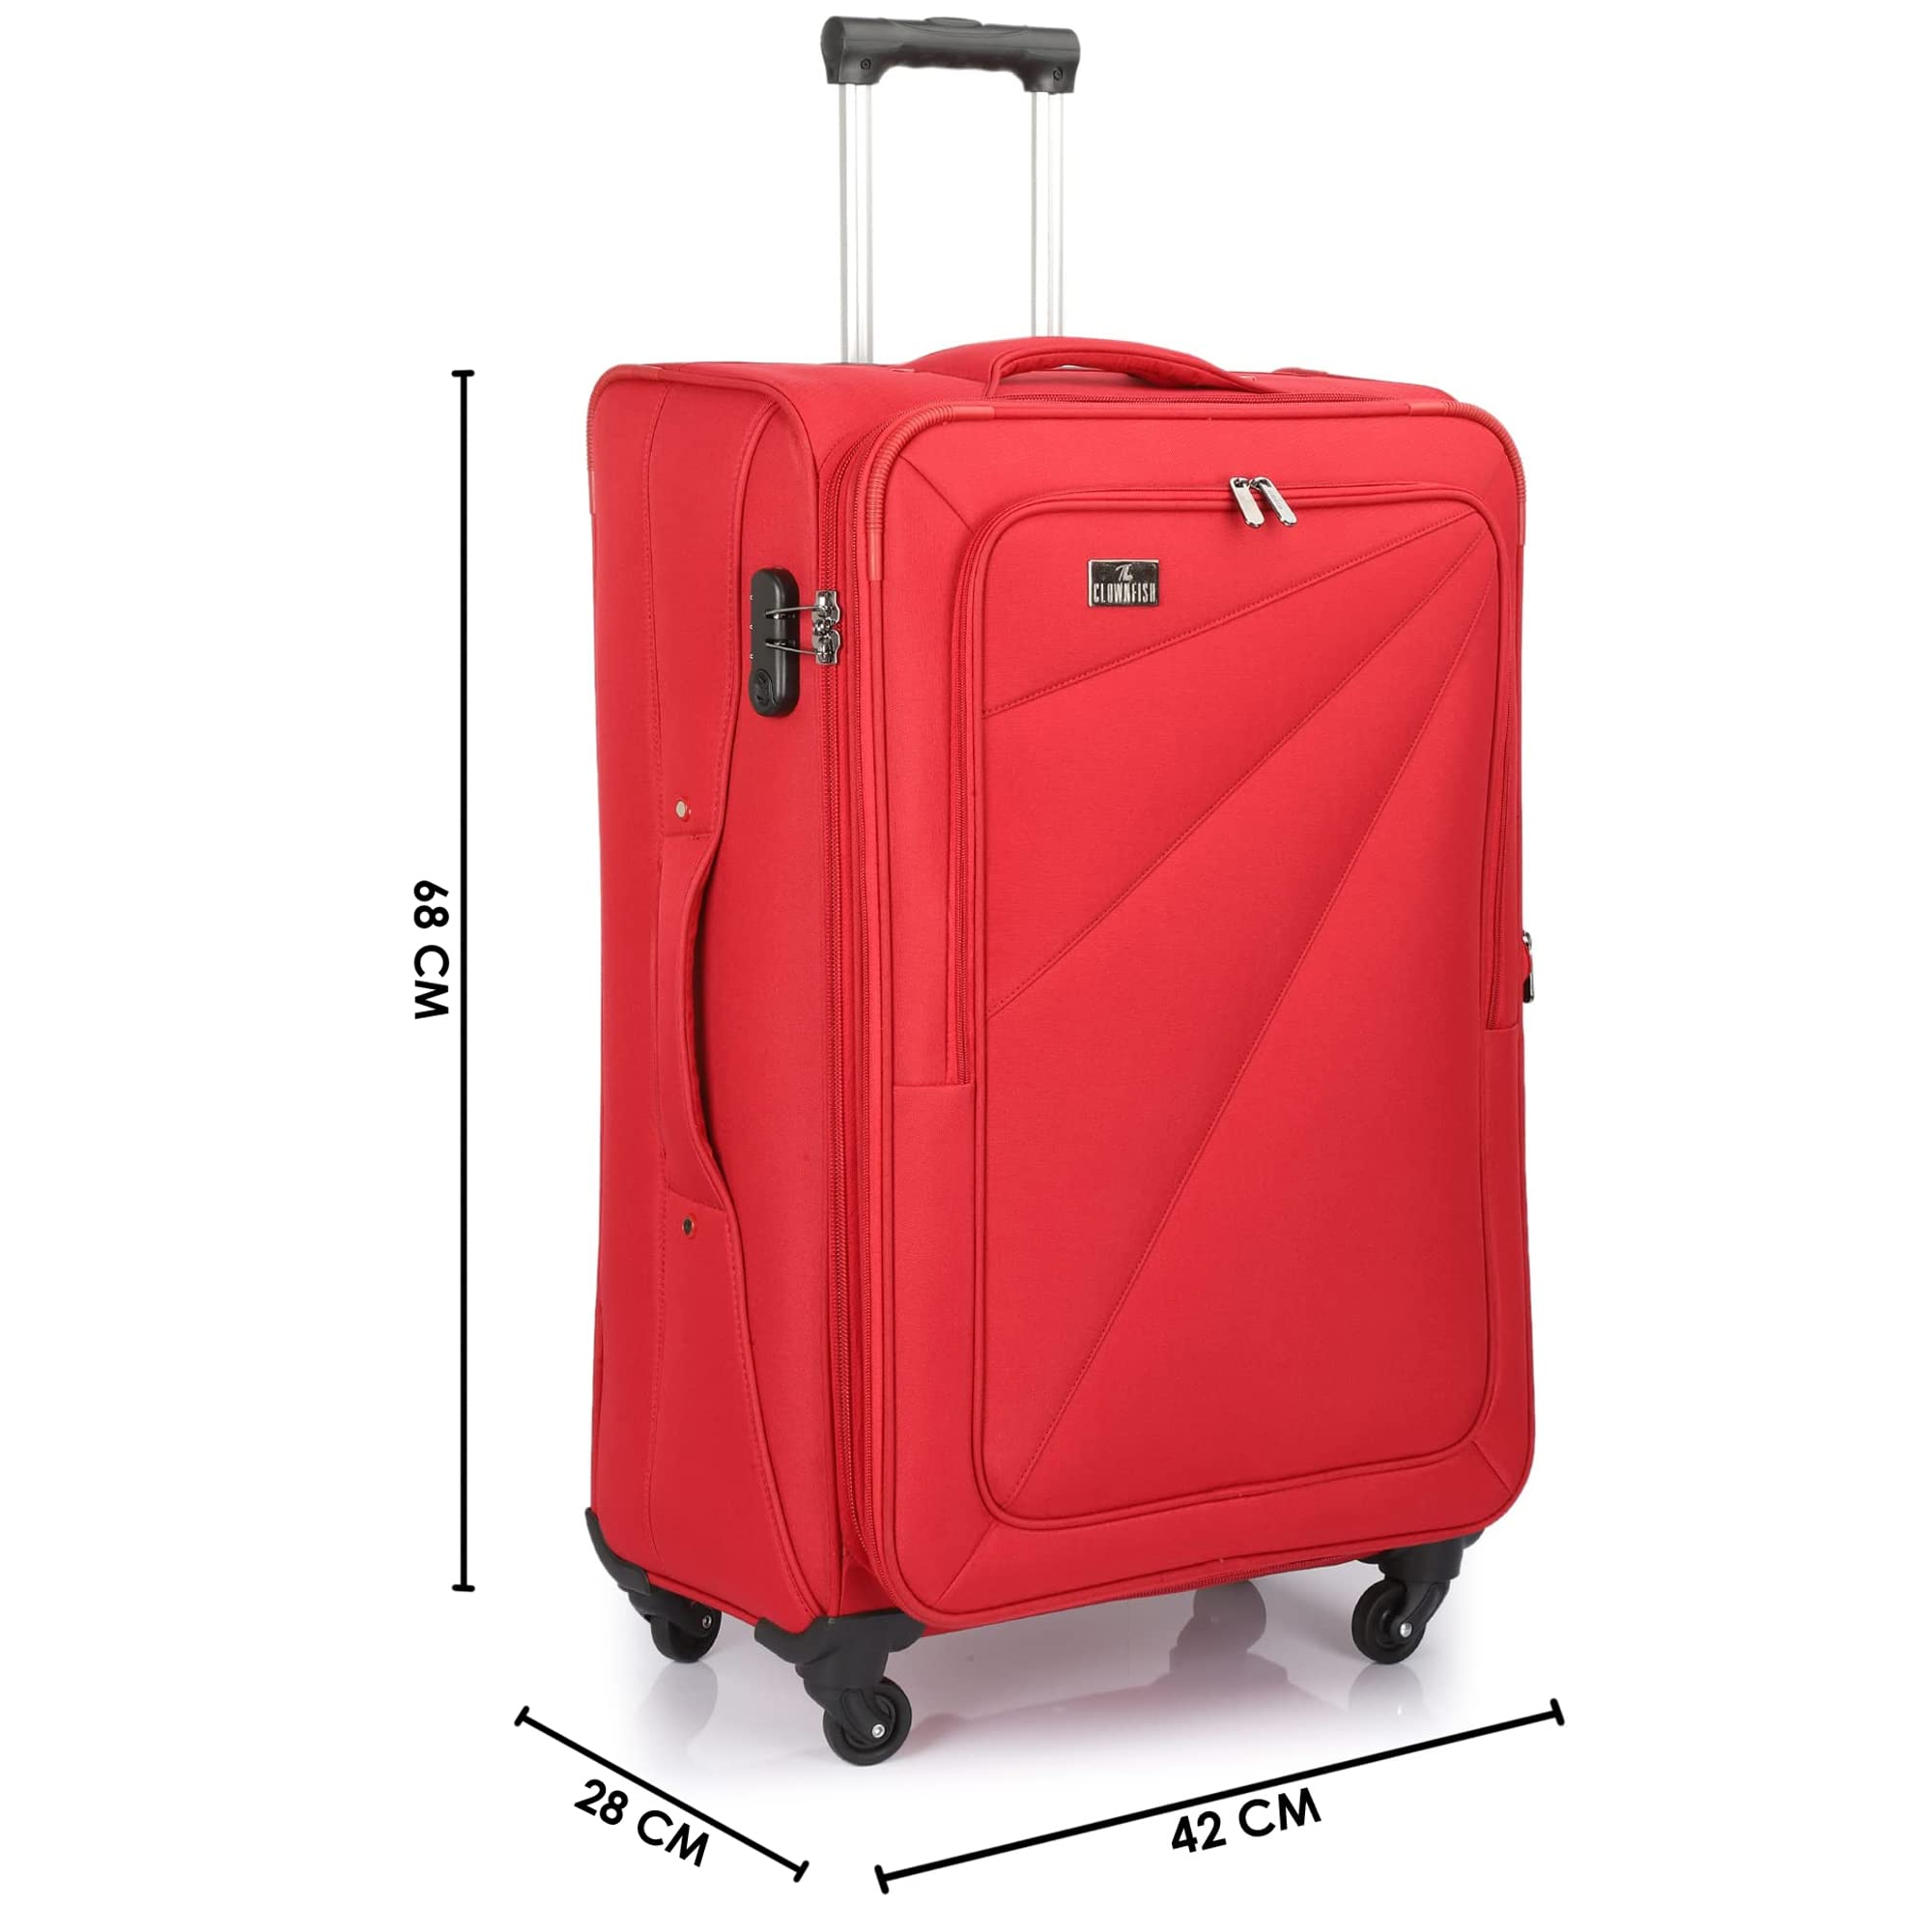 The Clownfish Farren Luggage Polyester Softcase Suitcase Four Wheel Trolley Bag- Red (Medium Size- 68 cm)